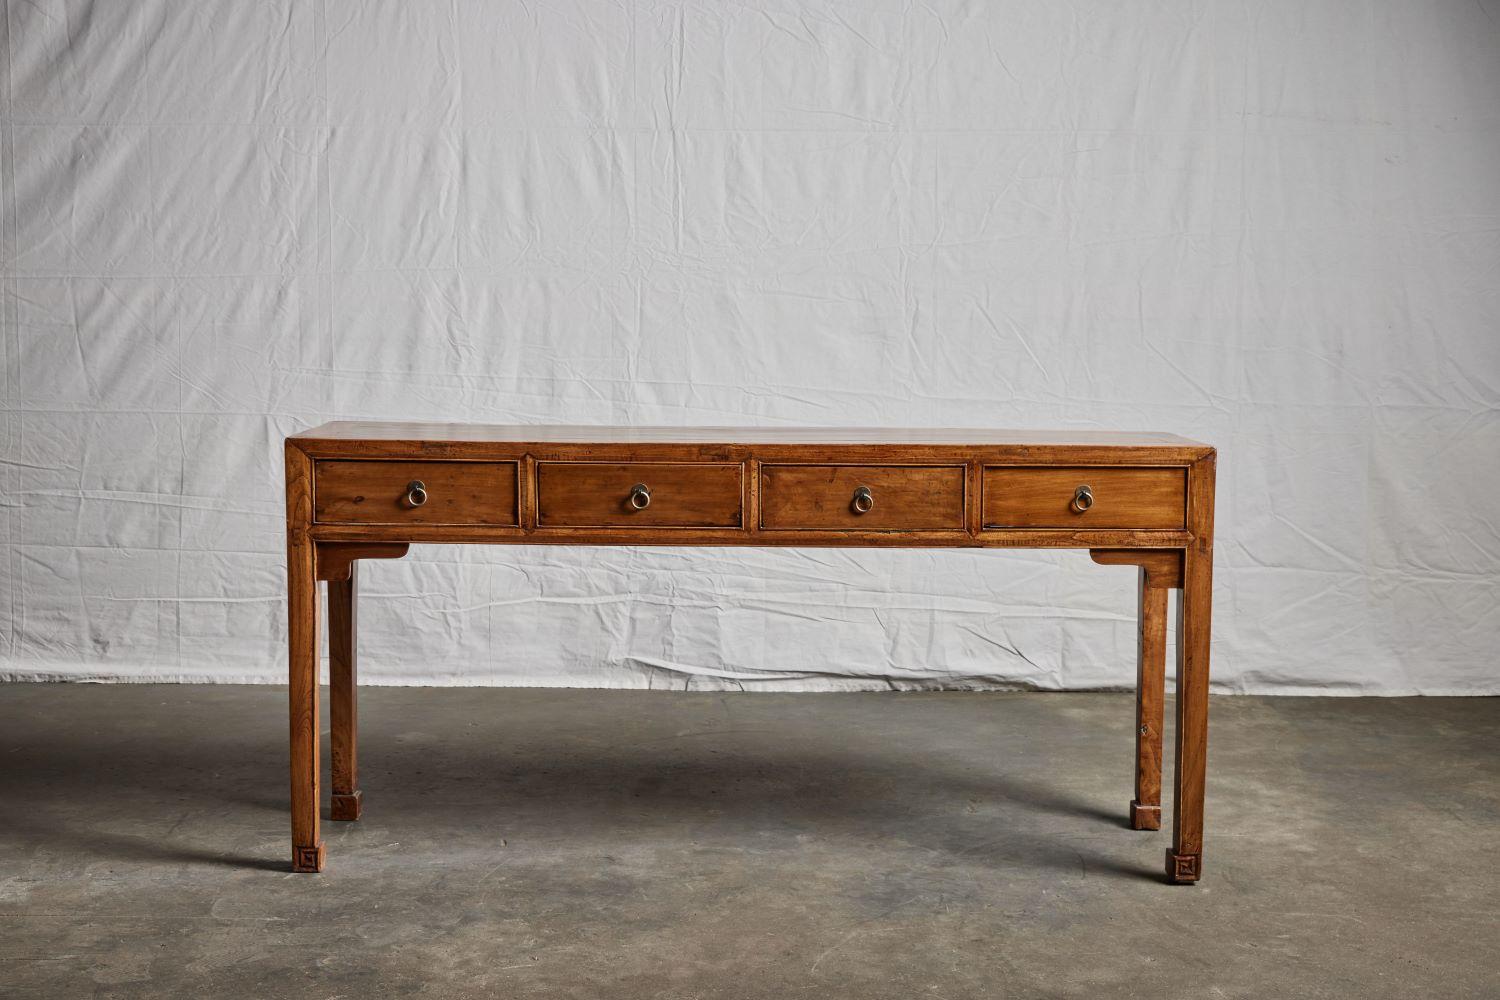 Late 19th century elm wood 4 drawer console table.